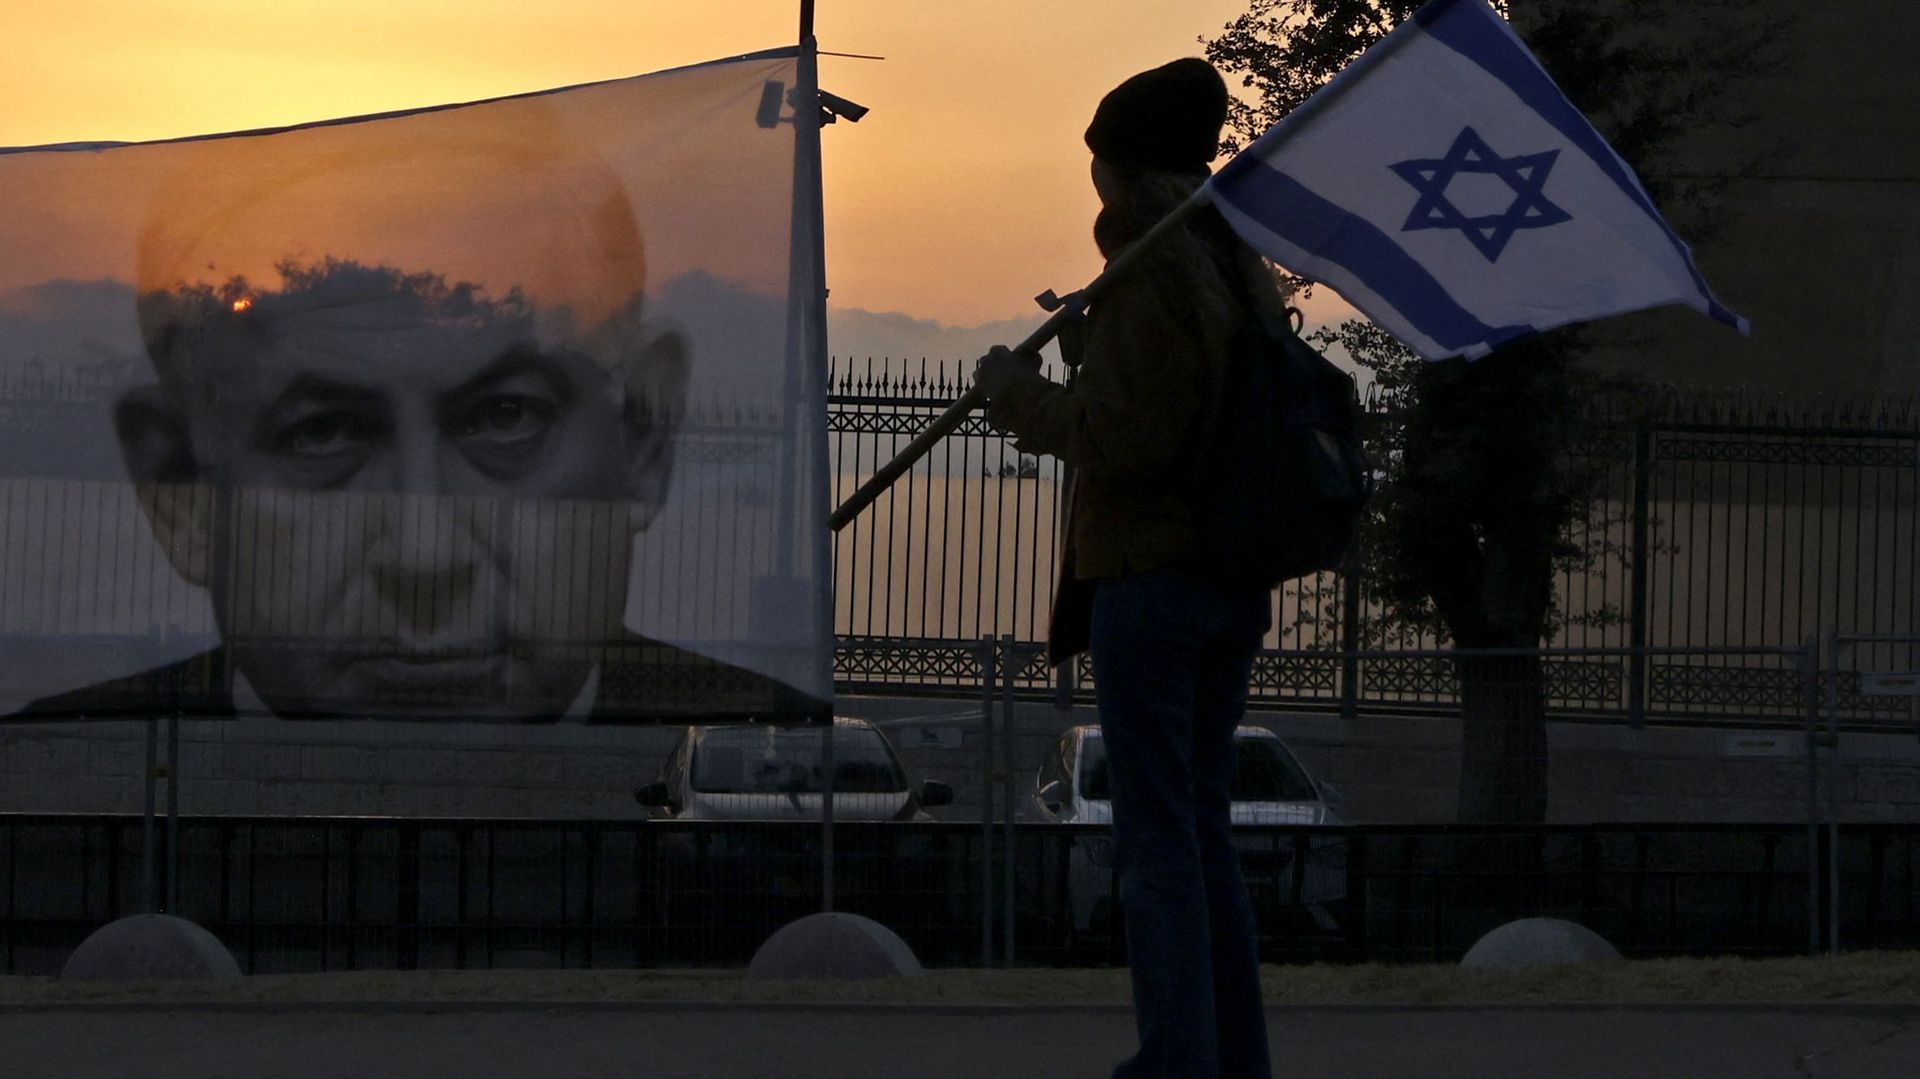 A protester walks past a banner depicting Israeli Prime Minister Benjamin Netanyahu on sunset outside the Knesset (parliament) in Jerusalem on February 20, 2023. – Demonstrators from across Israel descended on Jerusalem to rally near parliament ahead of t